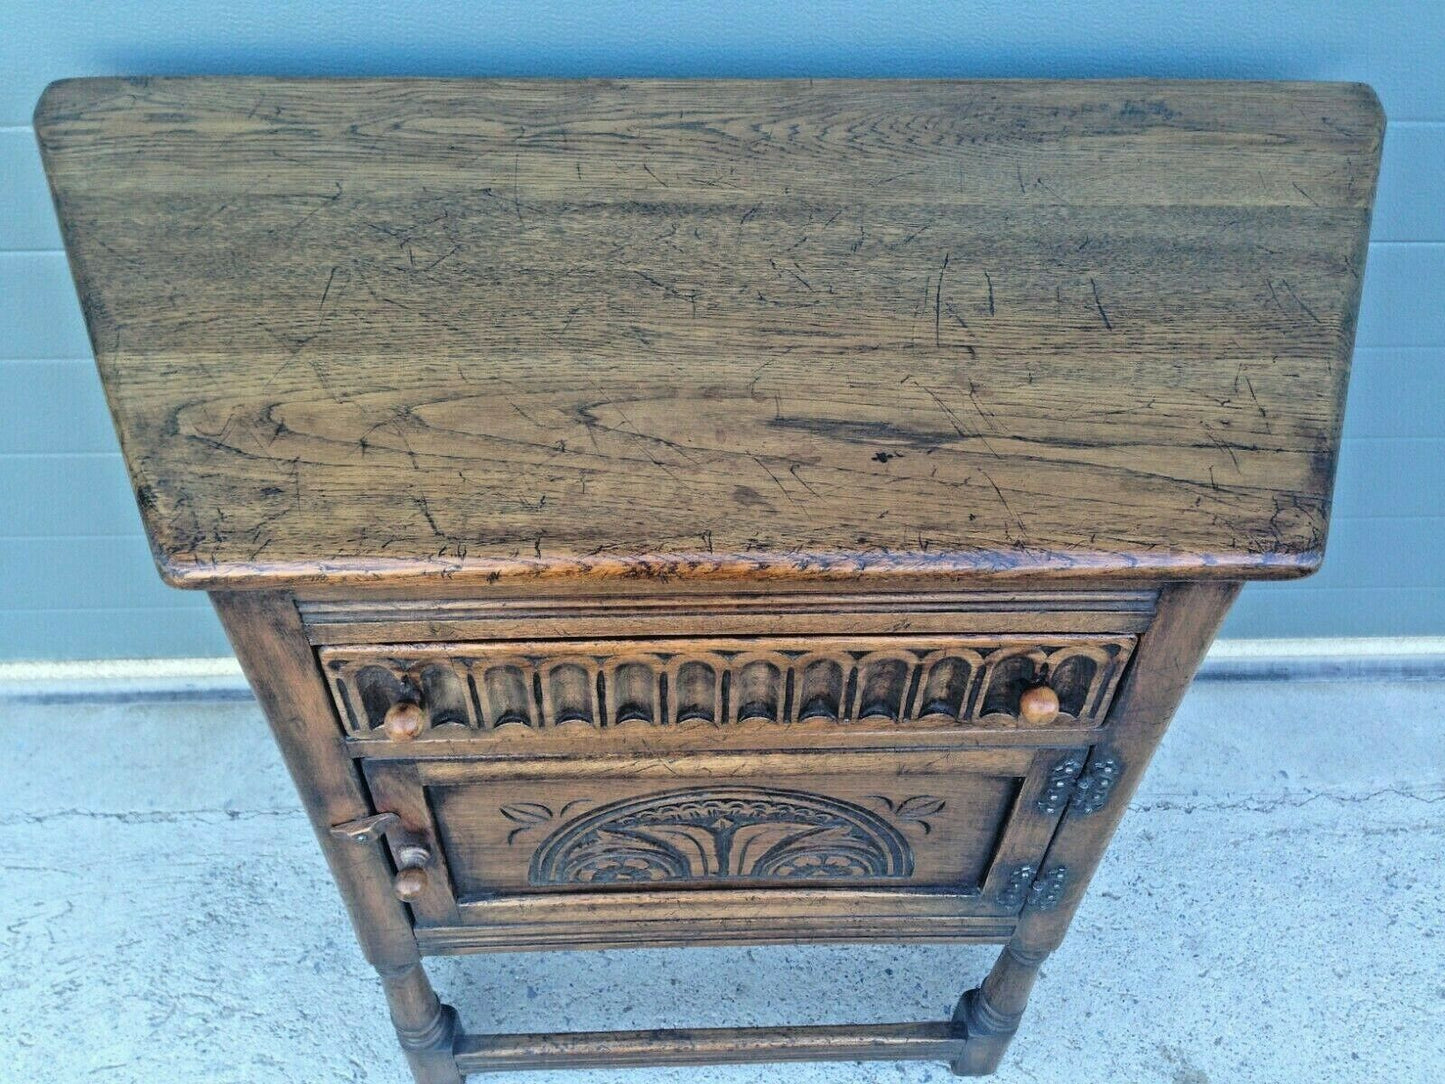 Vintage Carved Oak Credence Cupboard / Old Charm Style Hall Table SOLD